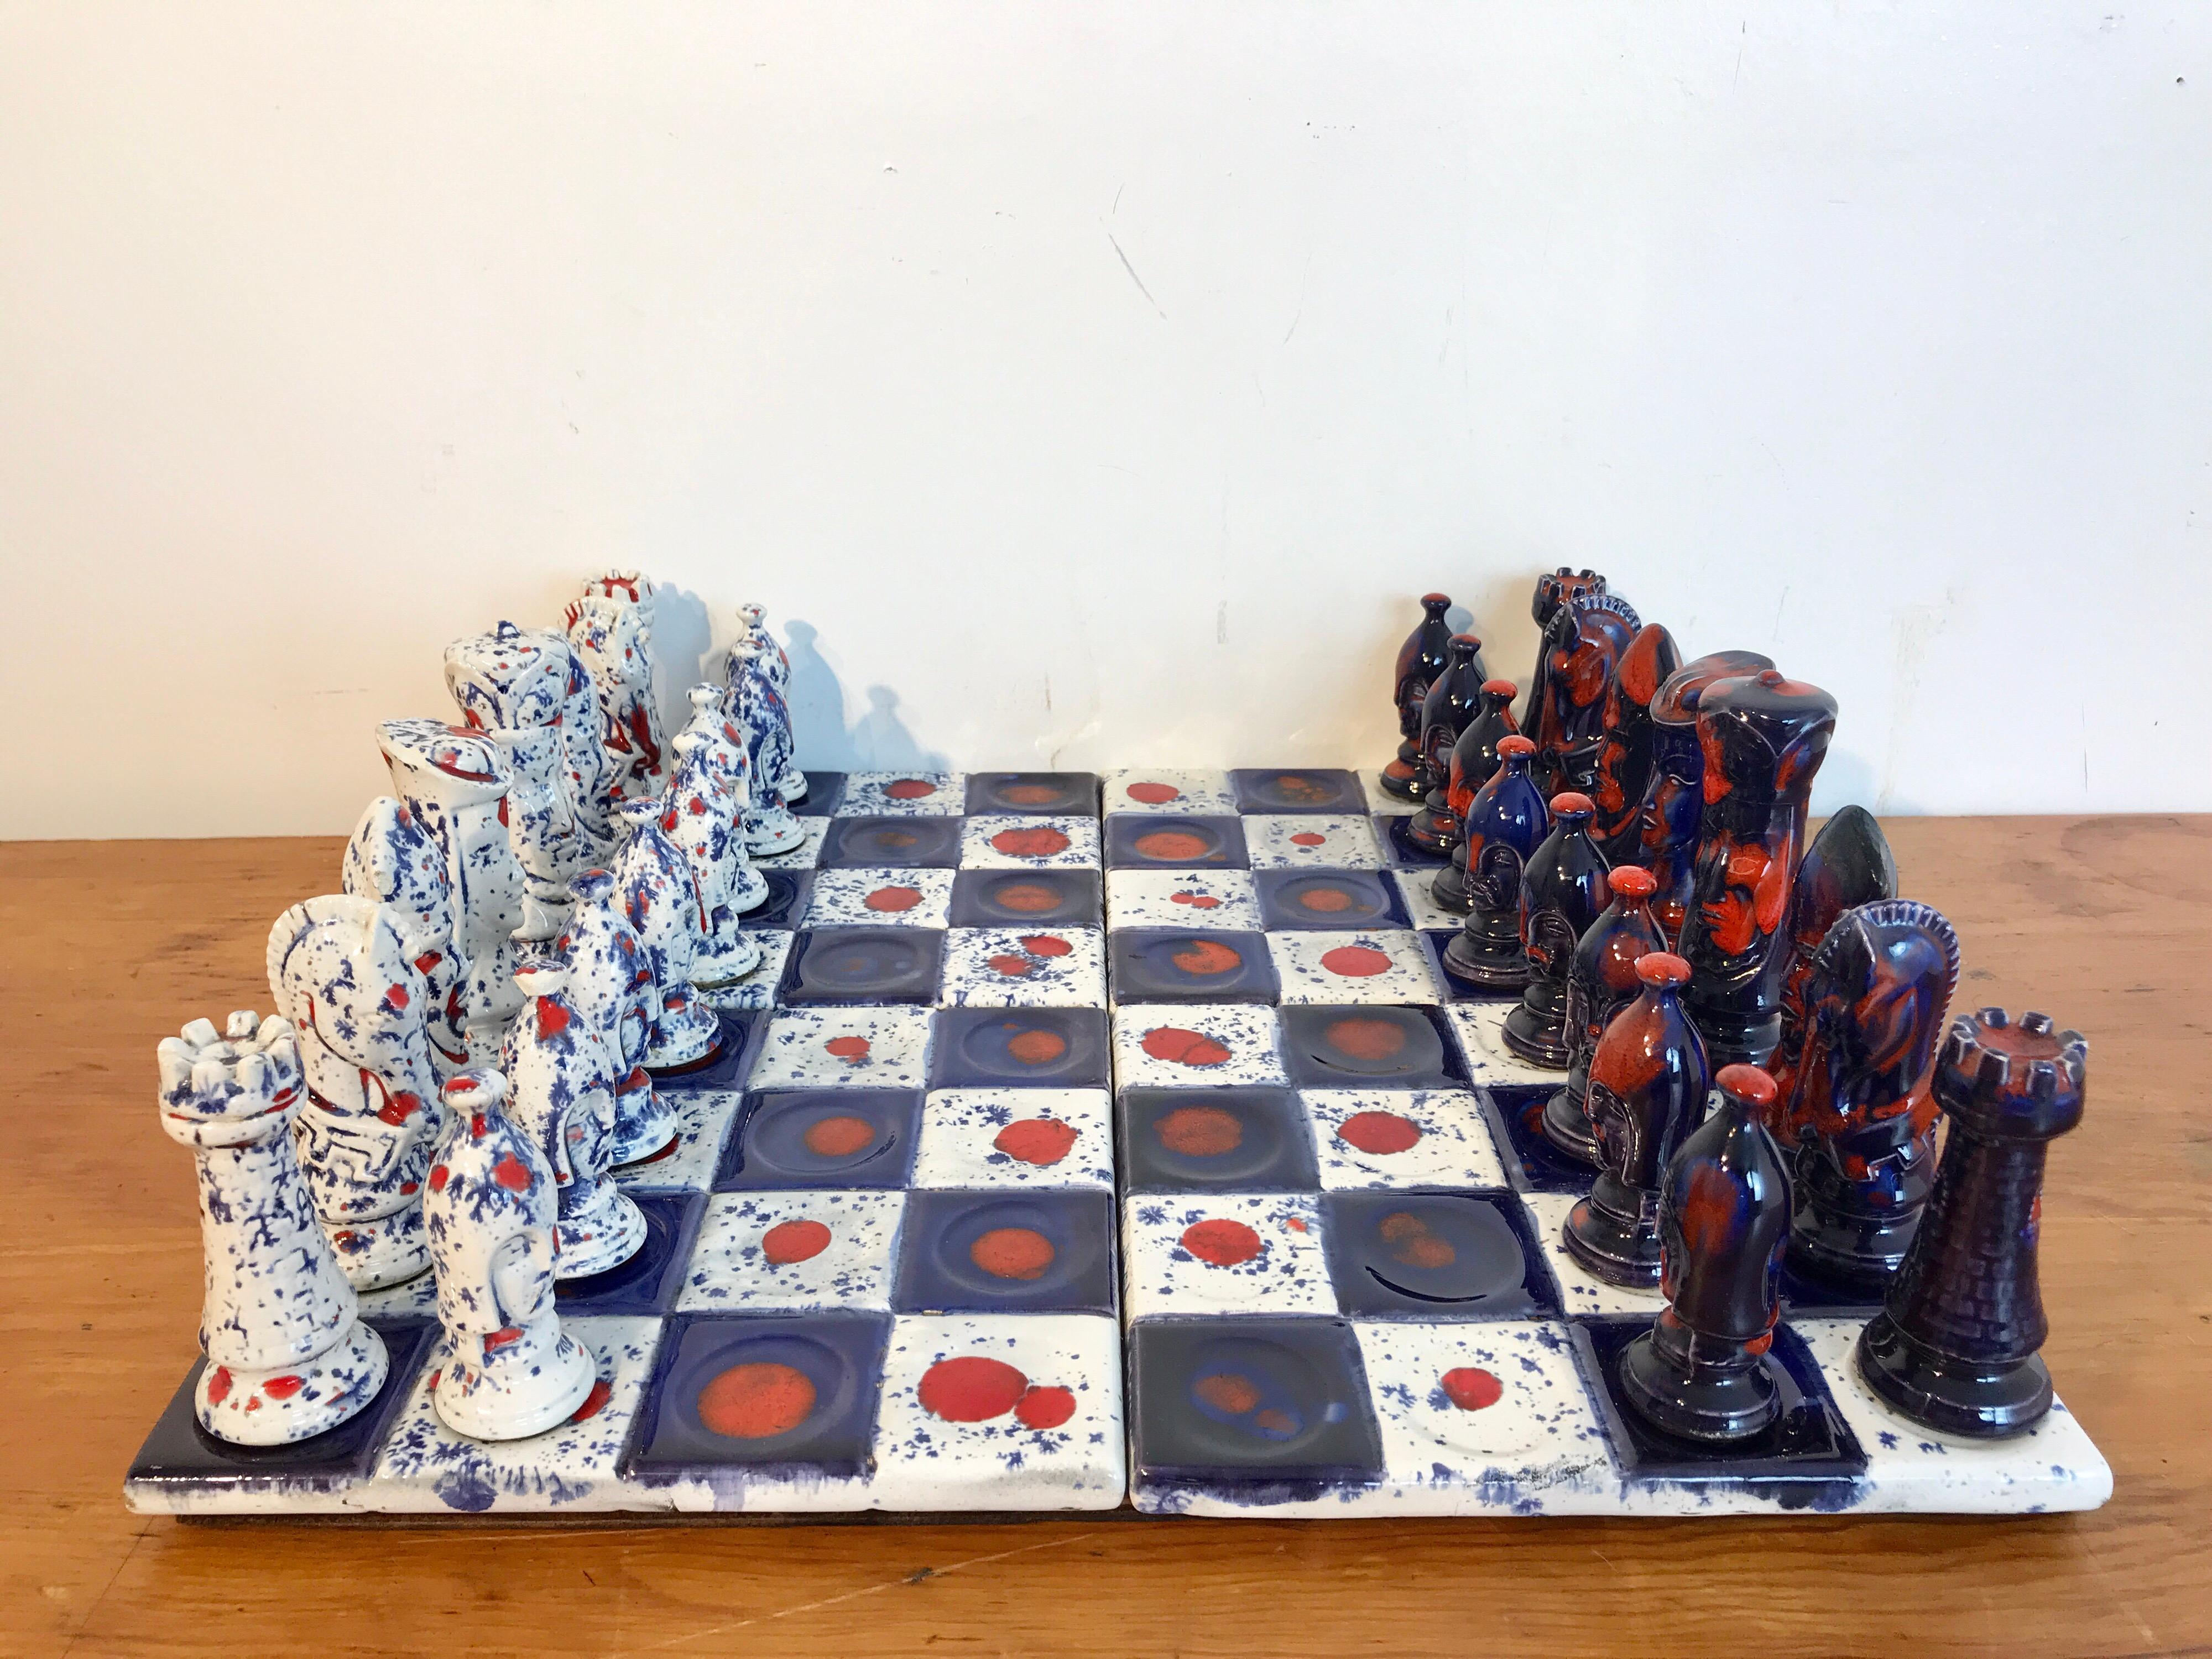 1970s Psychedelic Studio pottery chess set, complete with 32 3